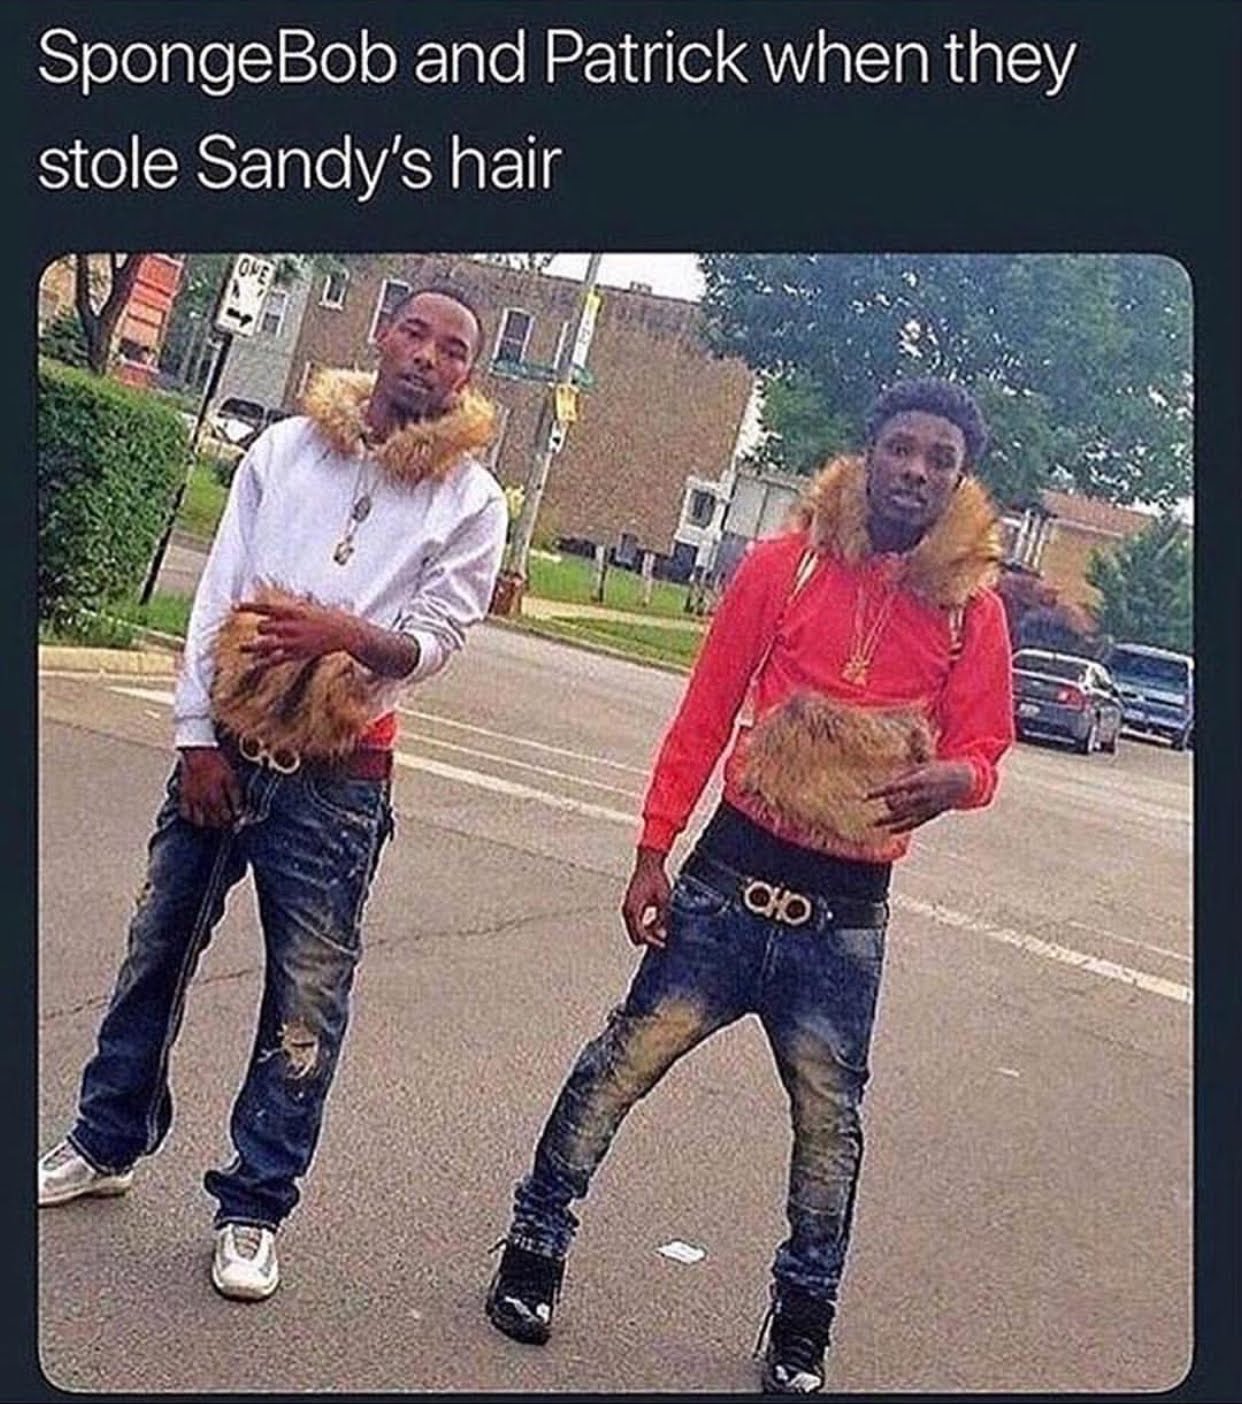 memes - asoingbob and patrick - SpongeBob and Patrick when they stole Sandy's hair Olo.